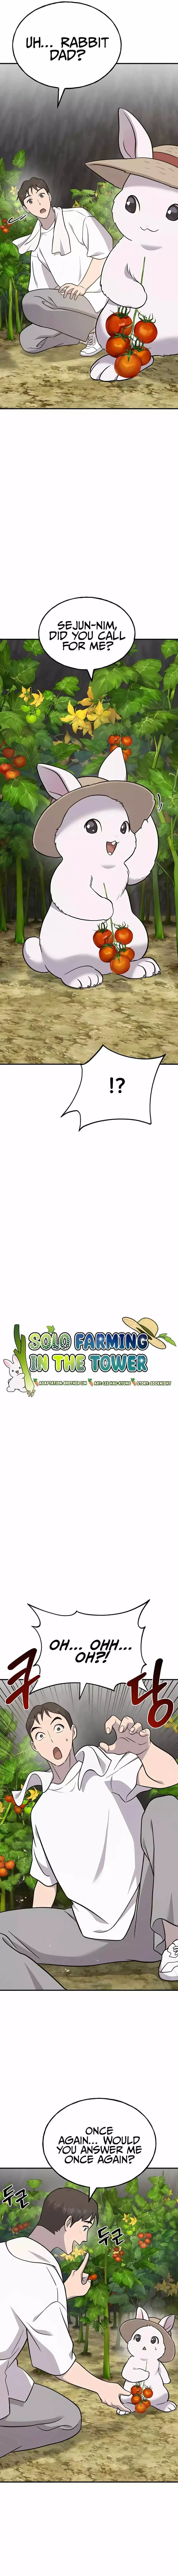 Solo Farming In The Tower - 52 page 5-7846d556